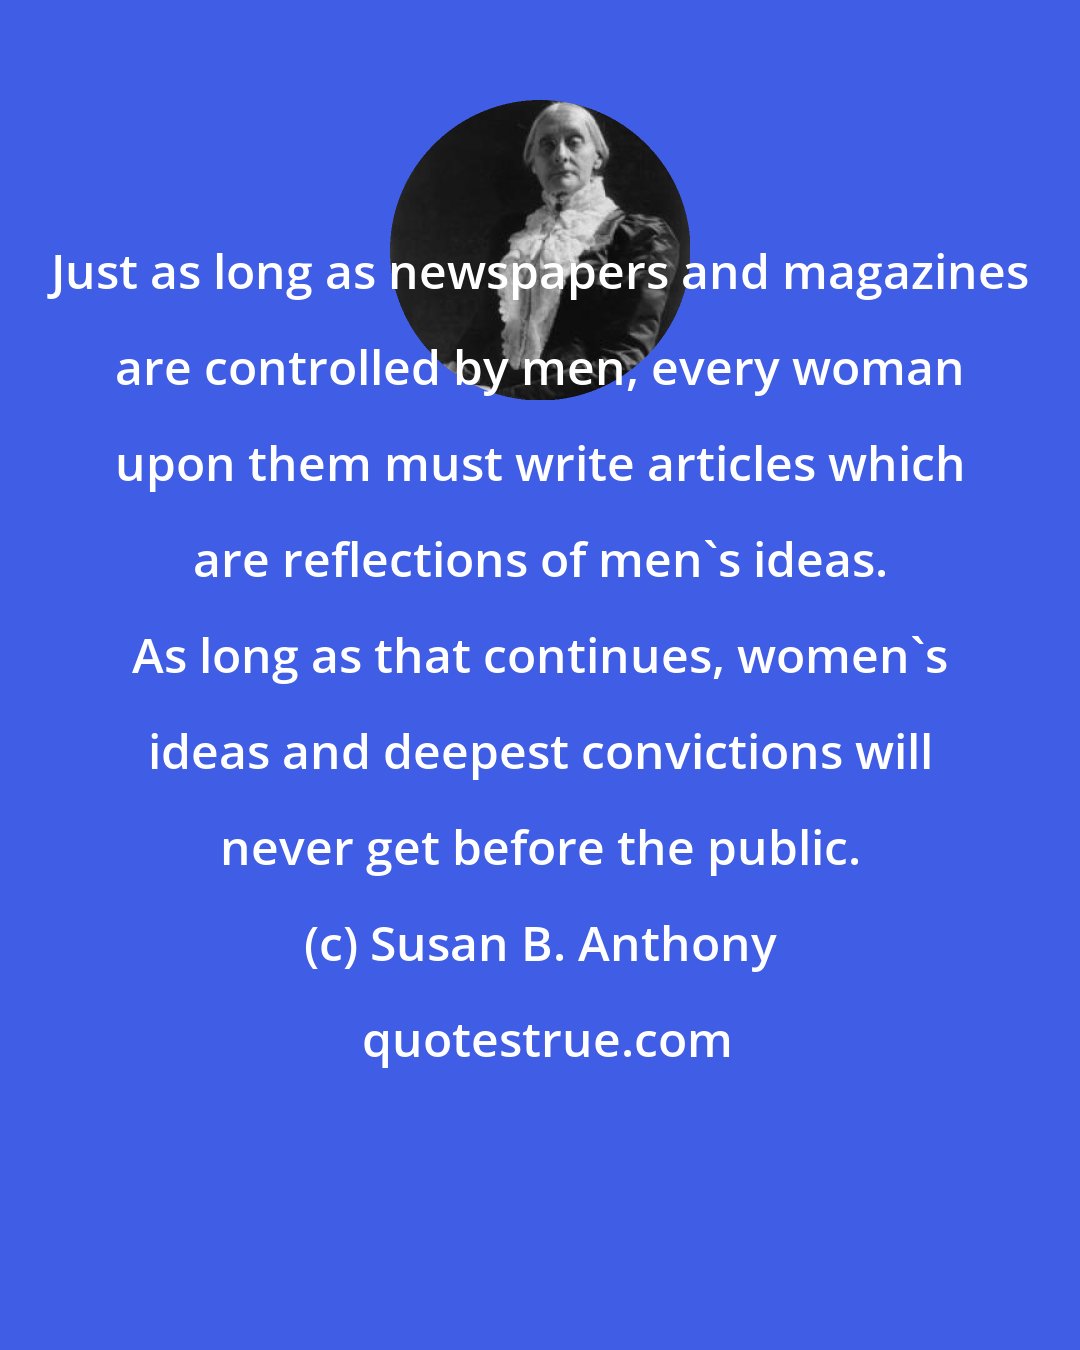 Susan B. Anthony: Just as long as newspapers and magazines are controlled by men, every woman upon them must write articles which are reflections of men's ideas. As long as that continues, women's ideas and deepest convictions will never get before the public.